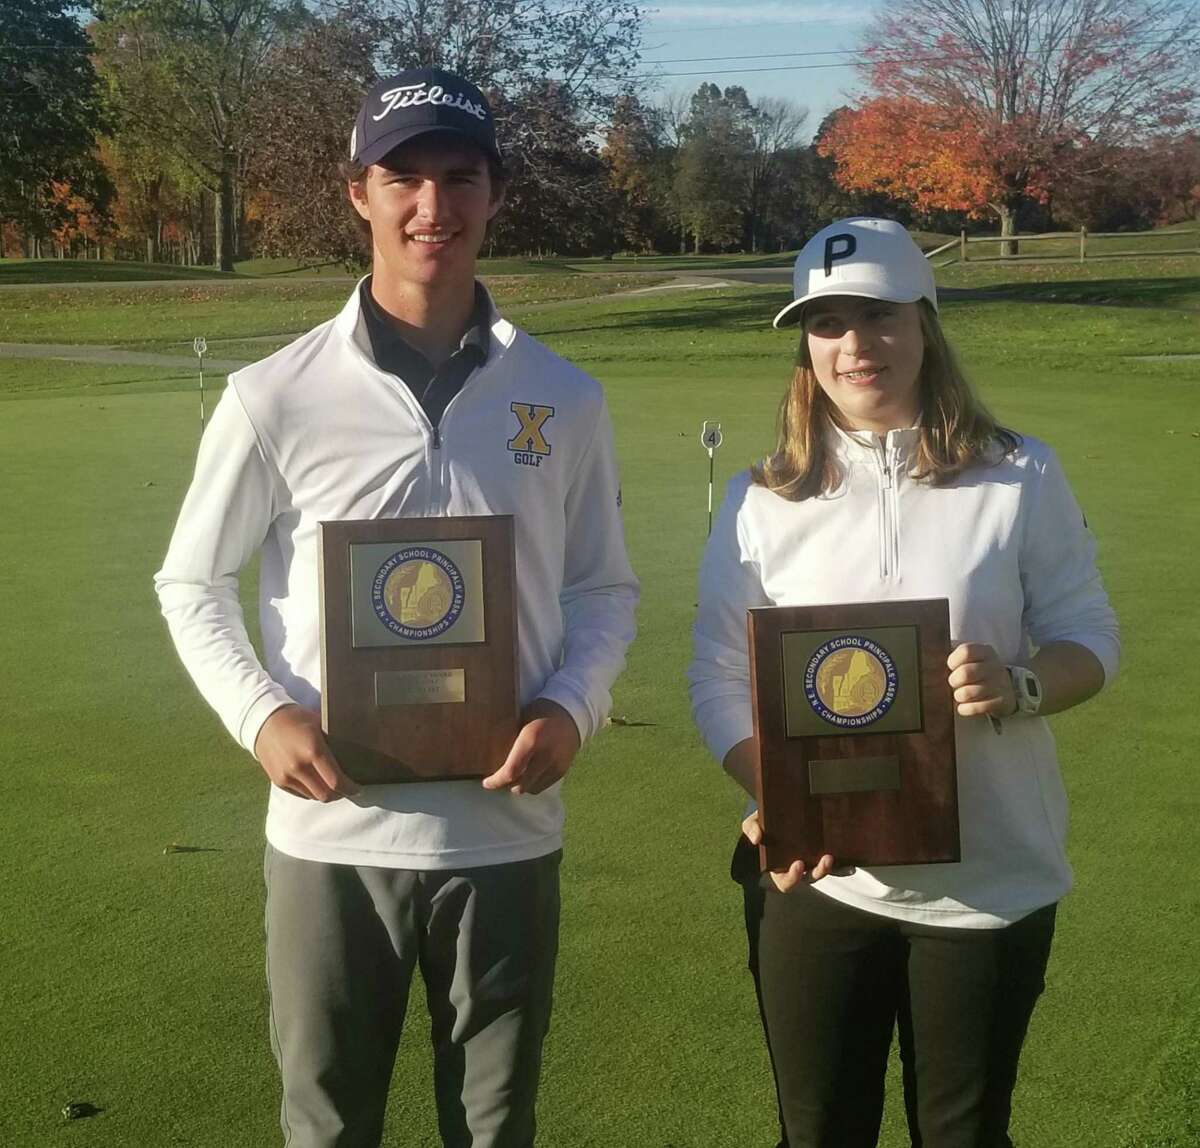 Joey Lenane, left, and Lillian Gulleserian, both from Massachusetts, were the New England golf champions in the meet held at the Mohegan Sun Golf Club in Baltic on Monday.